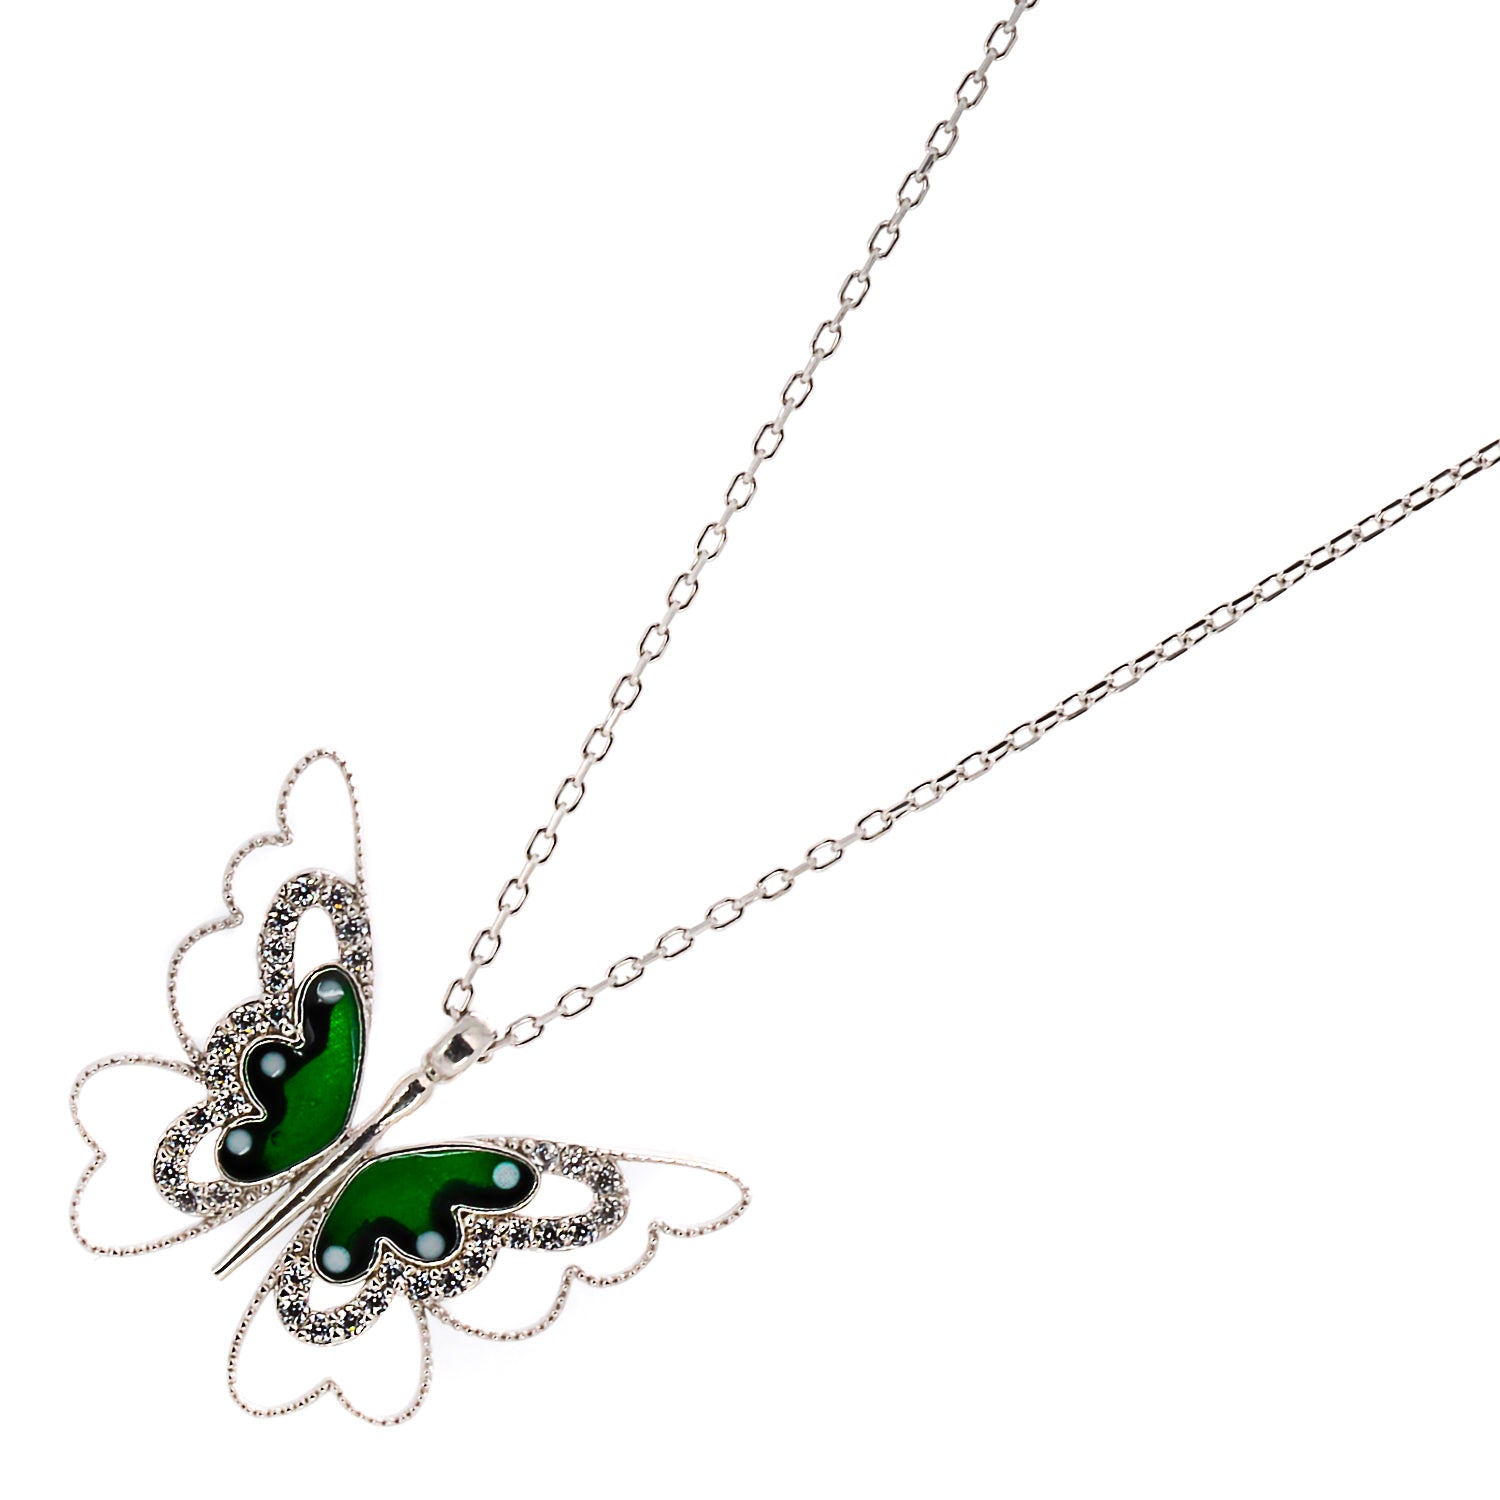 A detailed shot of the butterfly pendant on the Abundance Green Butterfly Necklace, showcasing its exquisite craftsmanship.